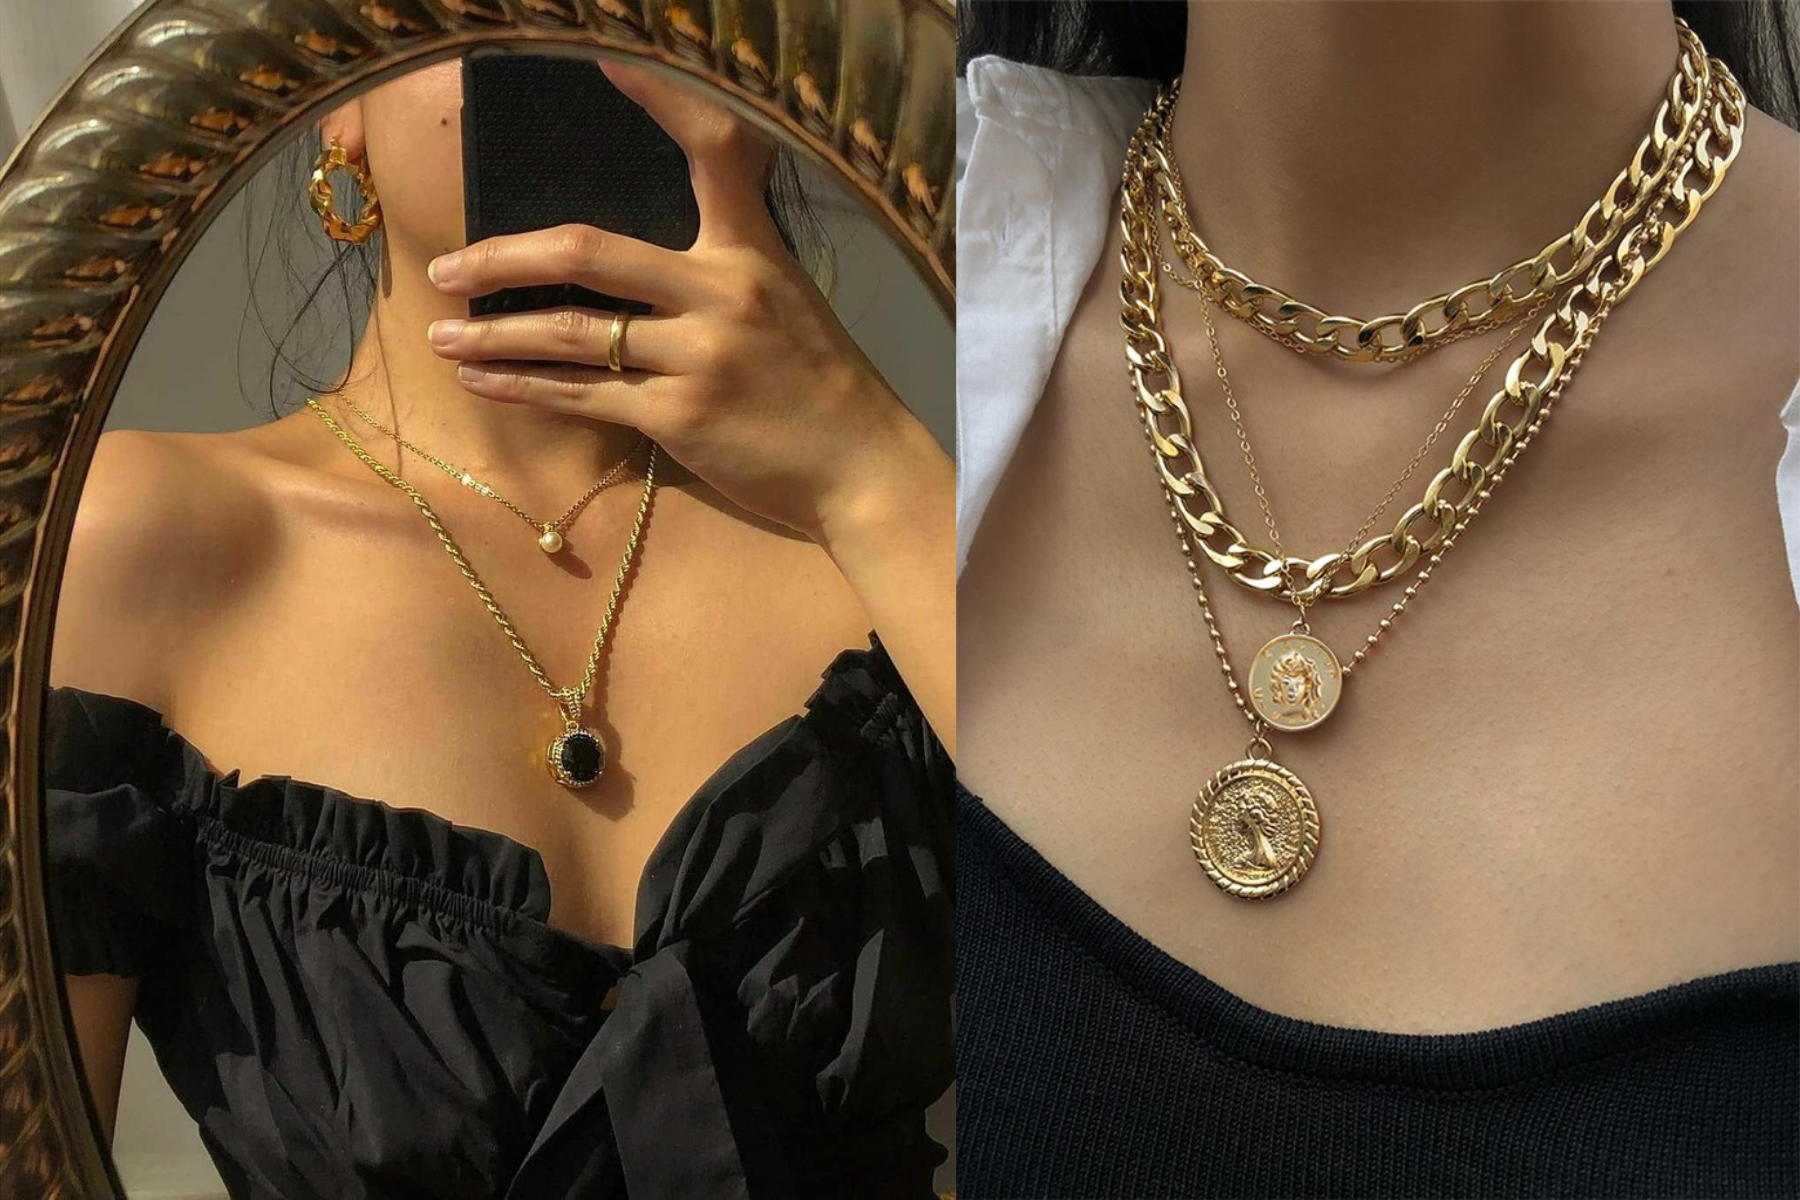 Vintage Necklaces For Women - A Trend That Never Goes Out Of Style